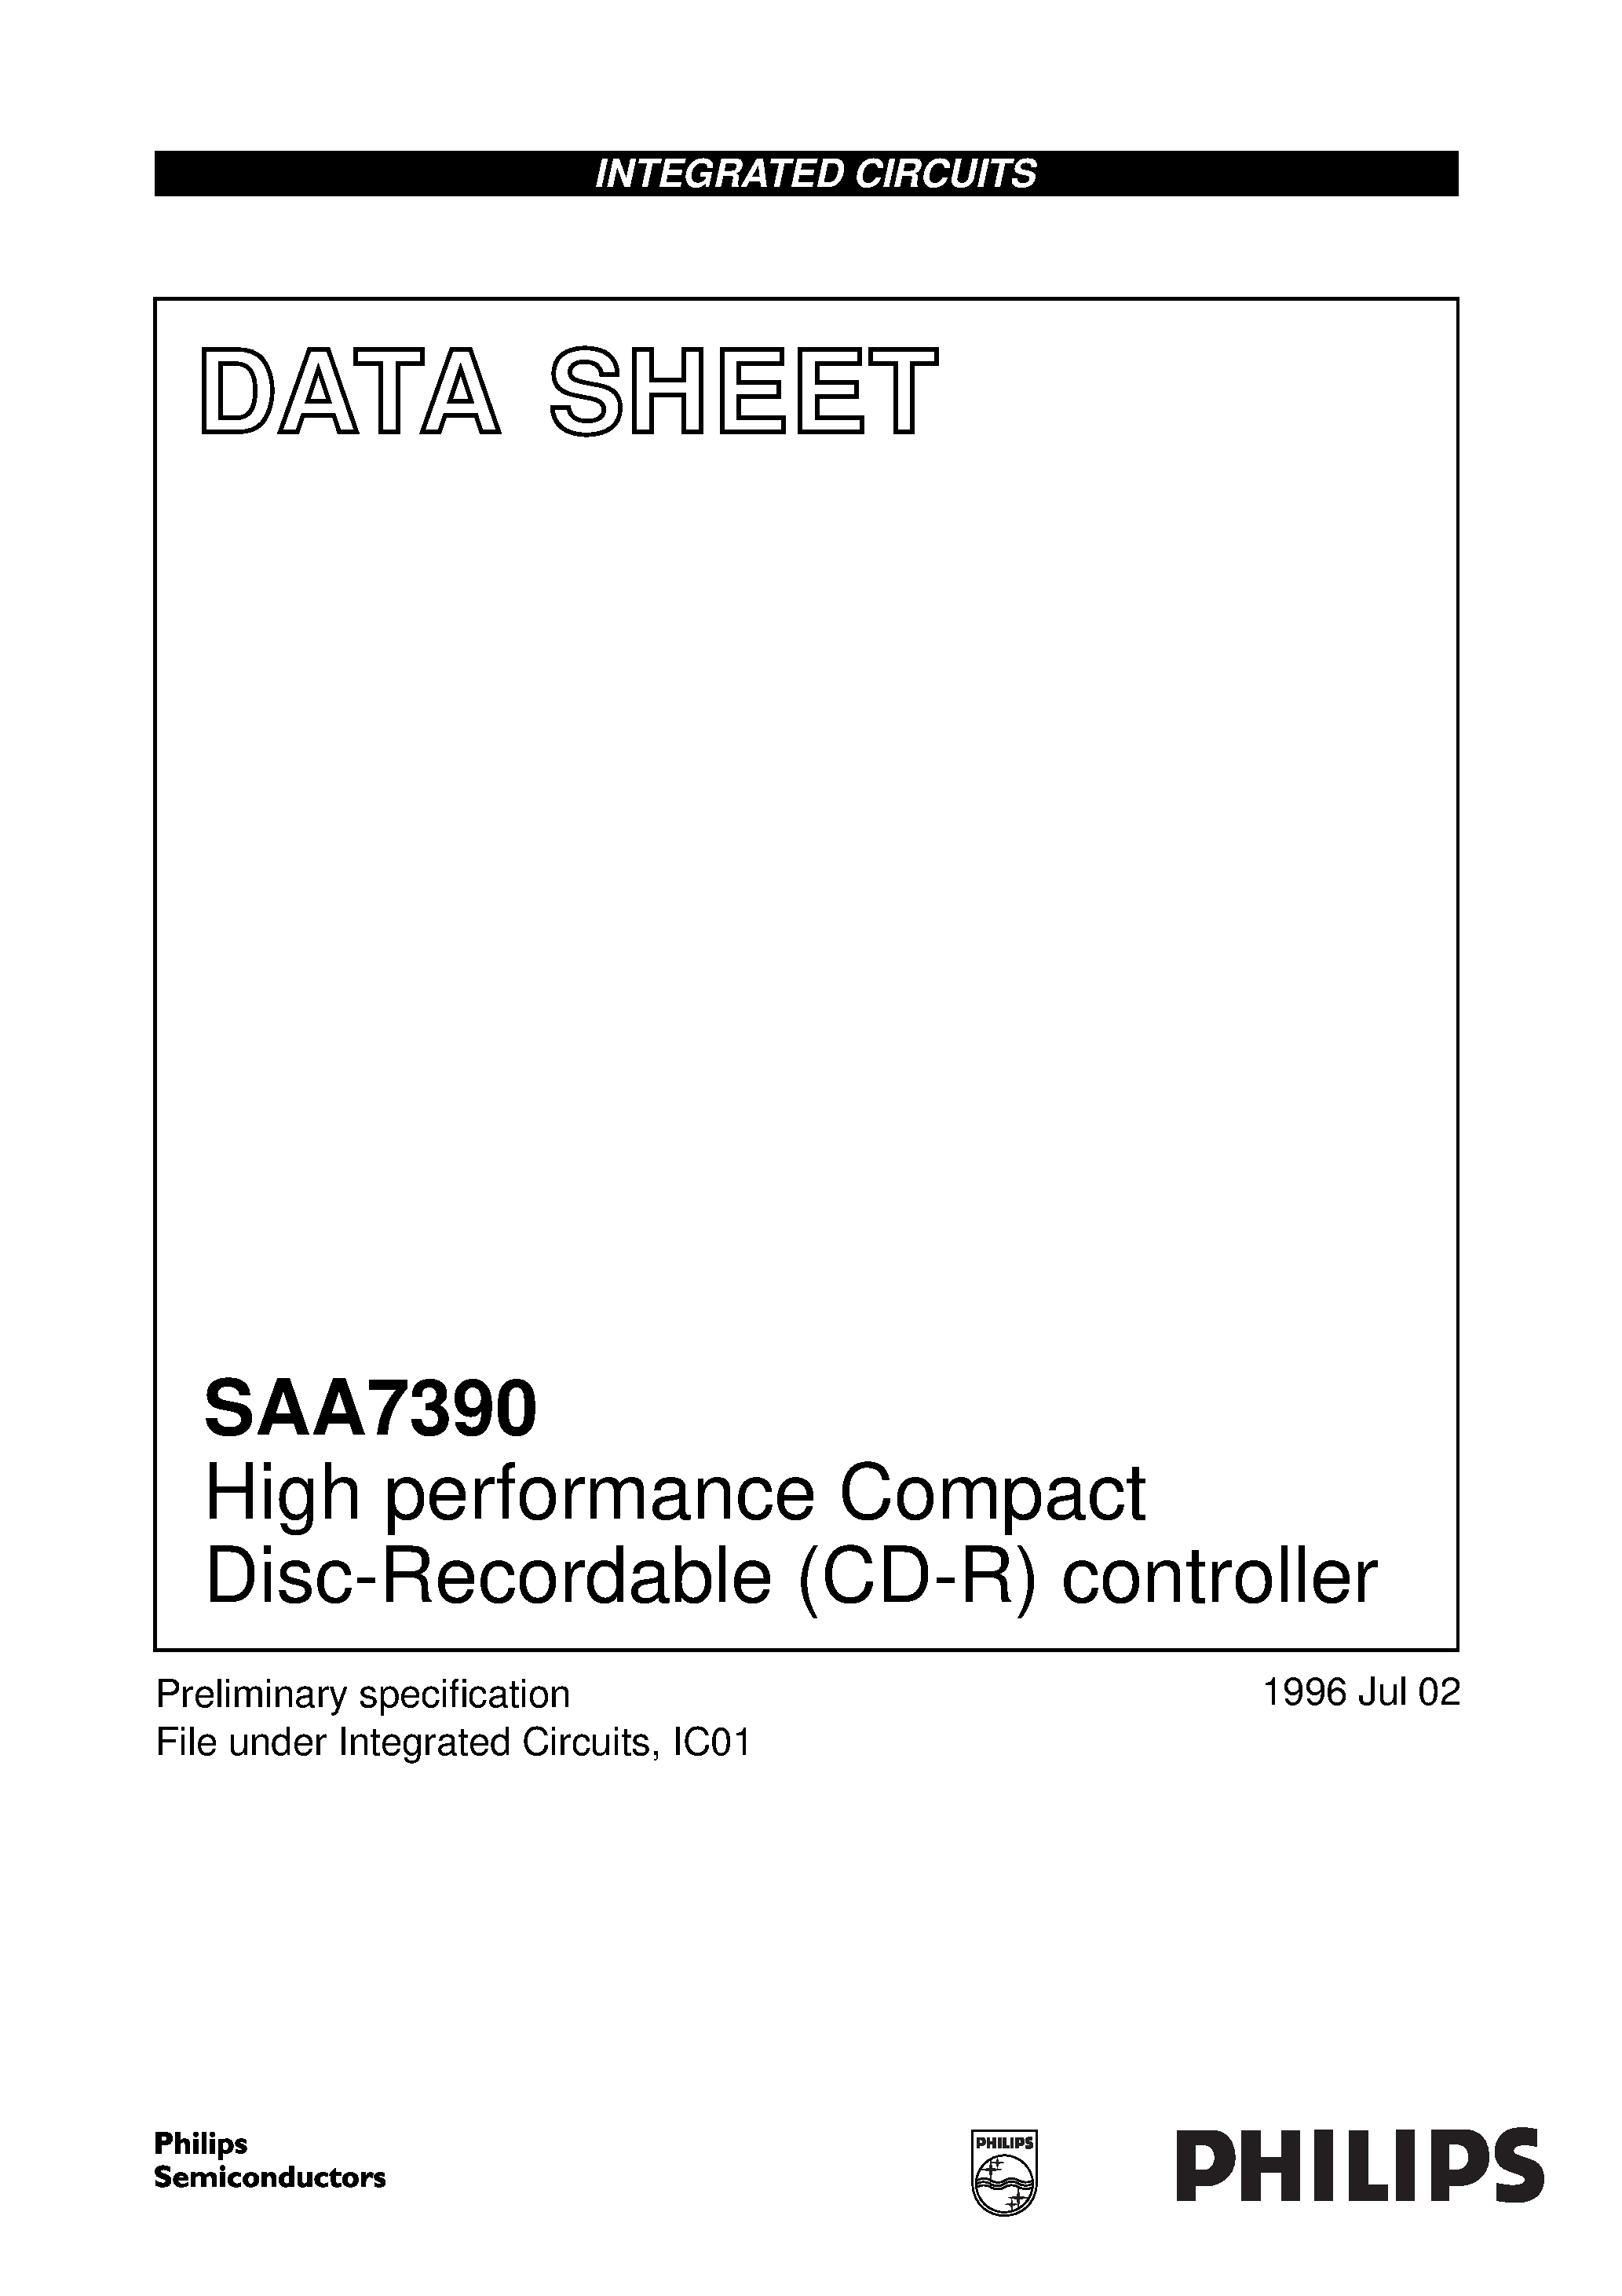 Datasheet SAA7390GP - High performance Compact Disc-Recordable CD-R controller page 1